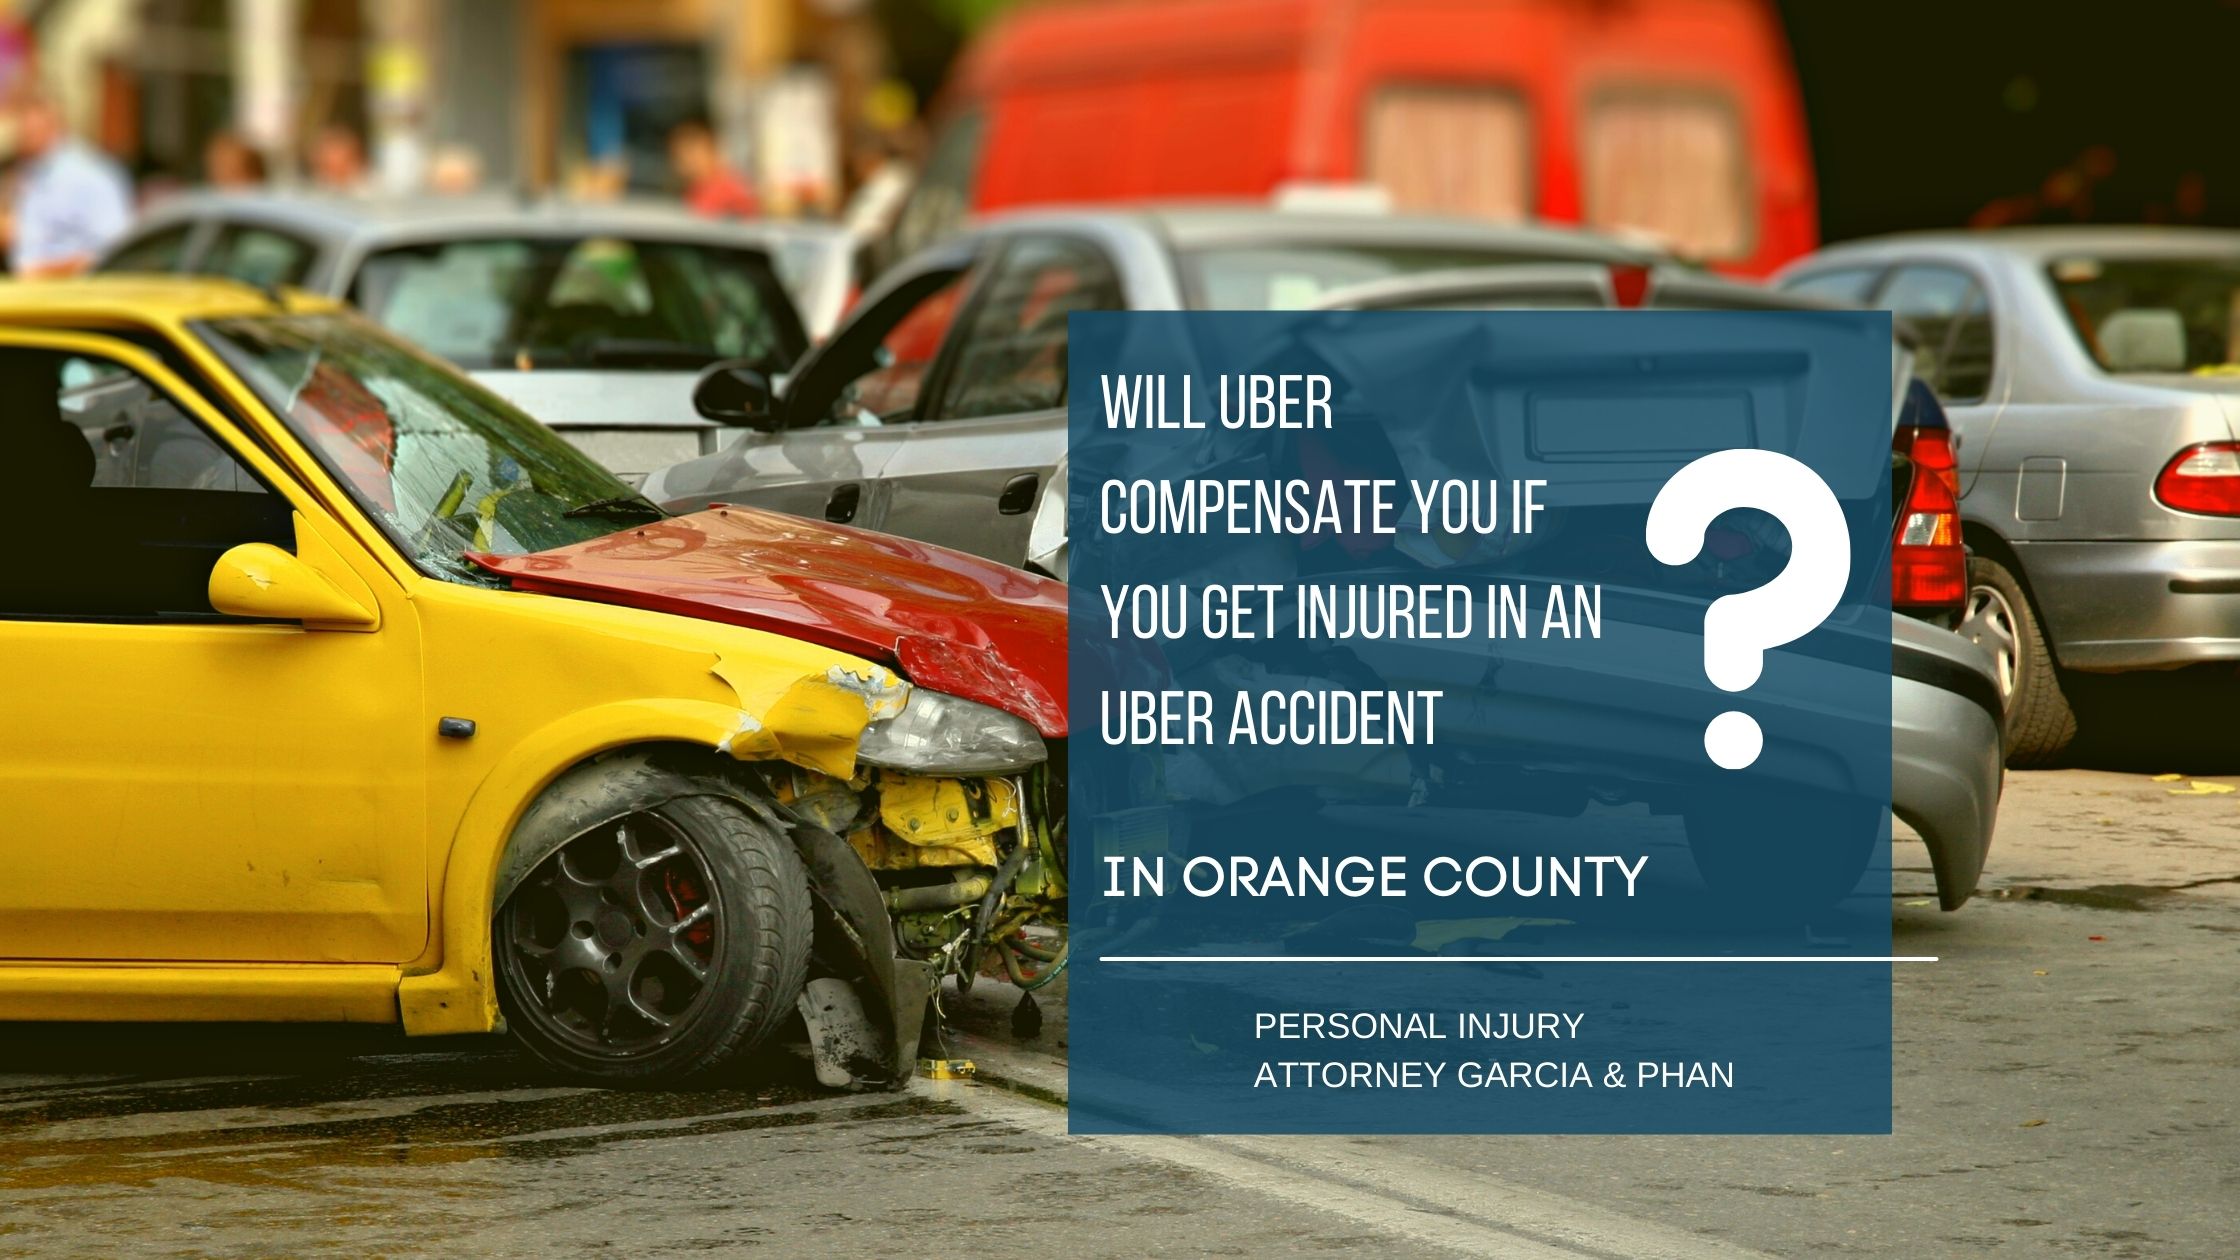 Uber accident | Garcia & Phan Personal Injury attorney